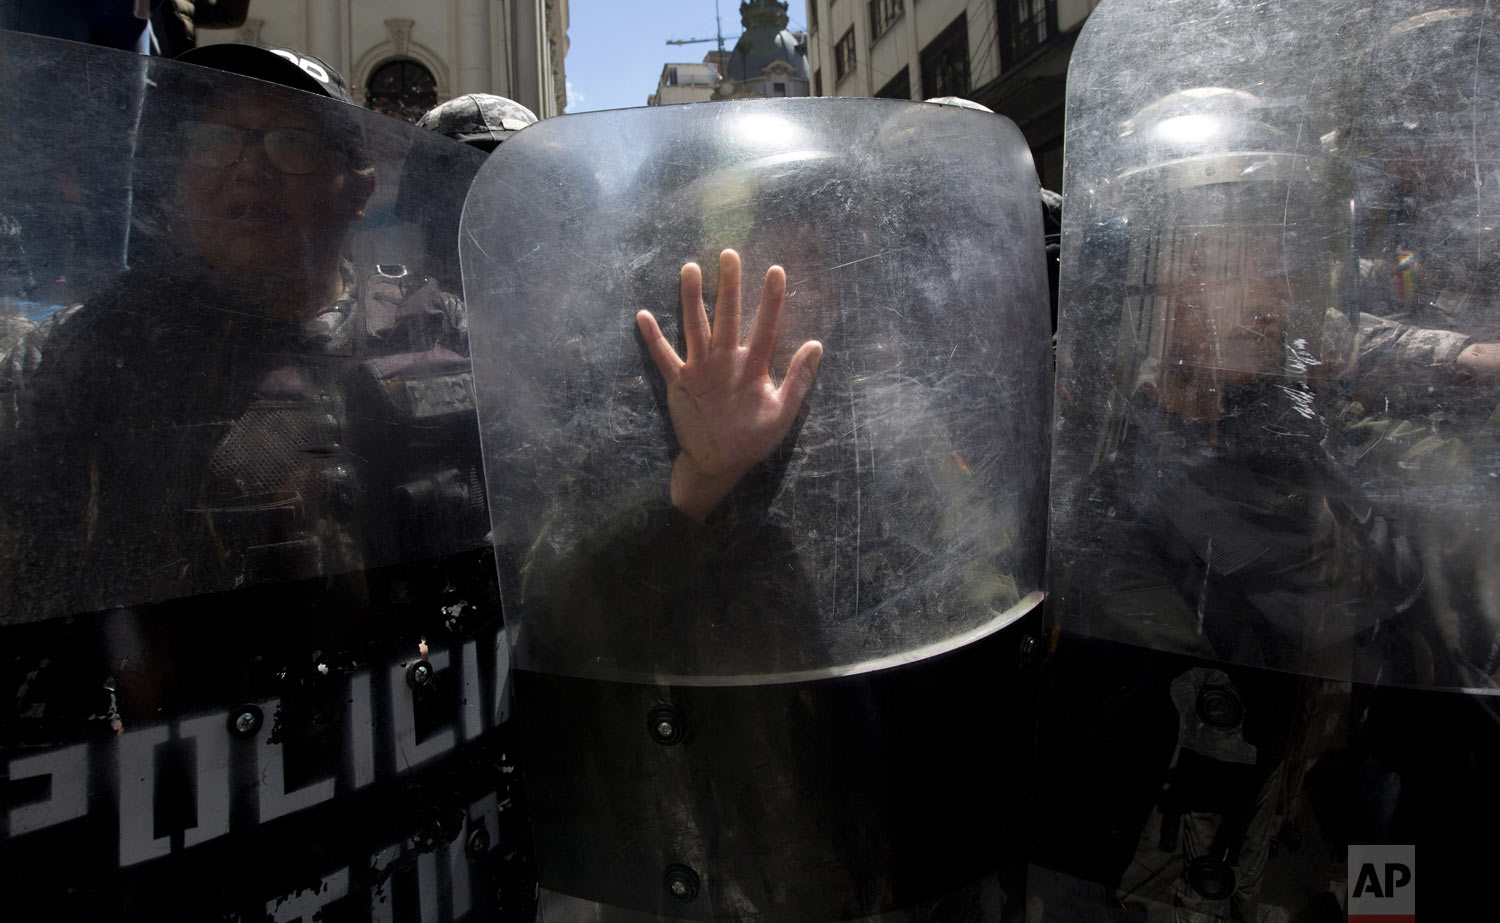  A riot police officer places her hand on her shield as she helps to prevent a march marking International Women's Day from reaching the government palace, in La Paz, Bolivia, on Friday, March 8, 2019. The day has been sponsored by the United Nations